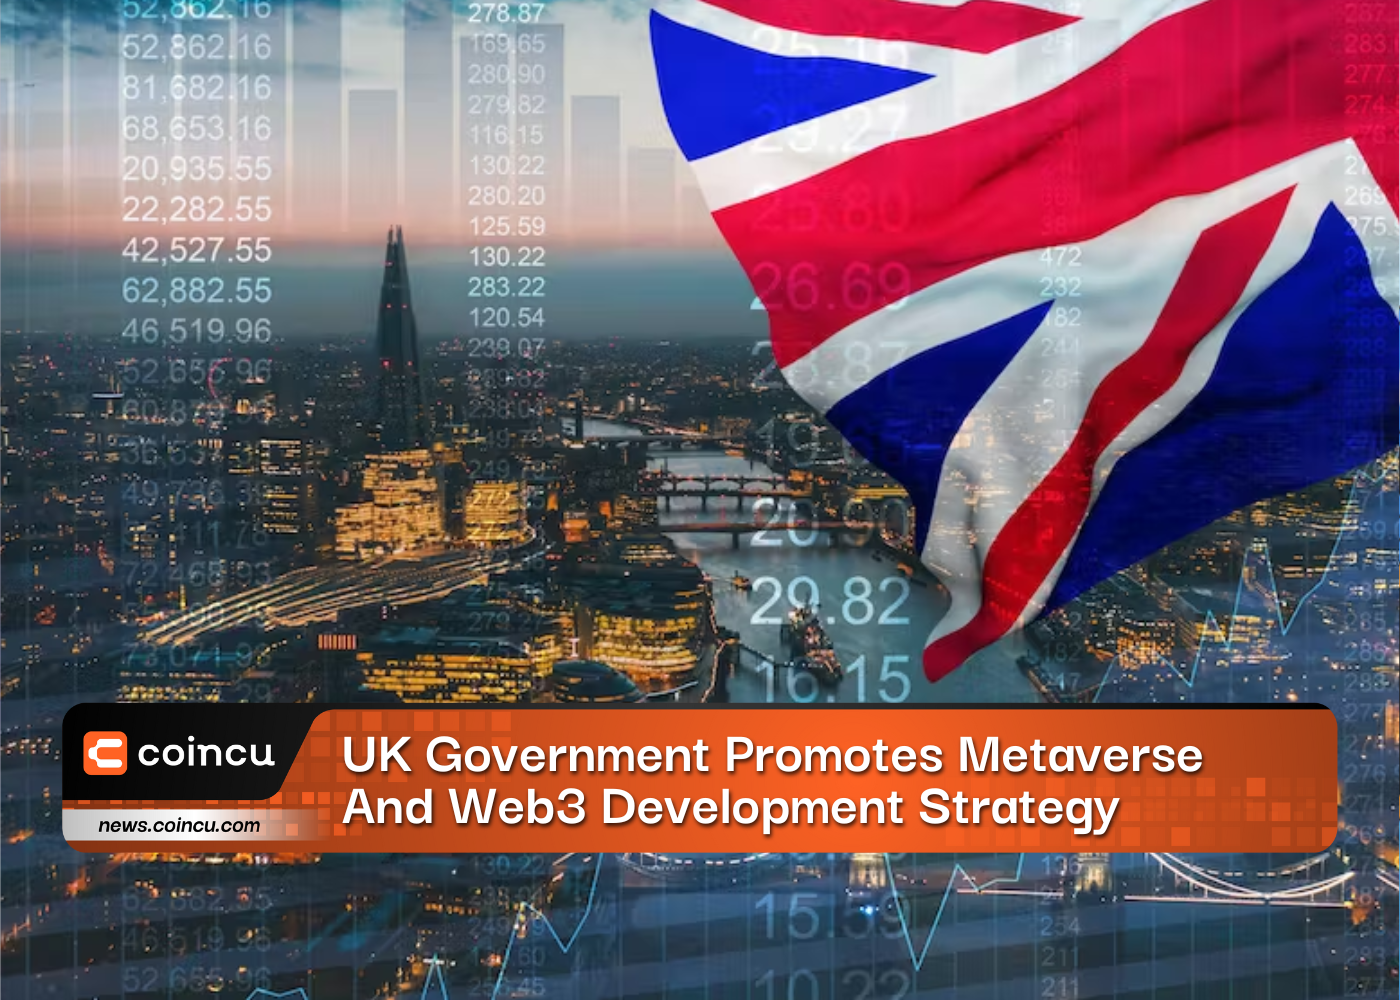 UK Government Promotes Metaverse And Web3 Development Strategy